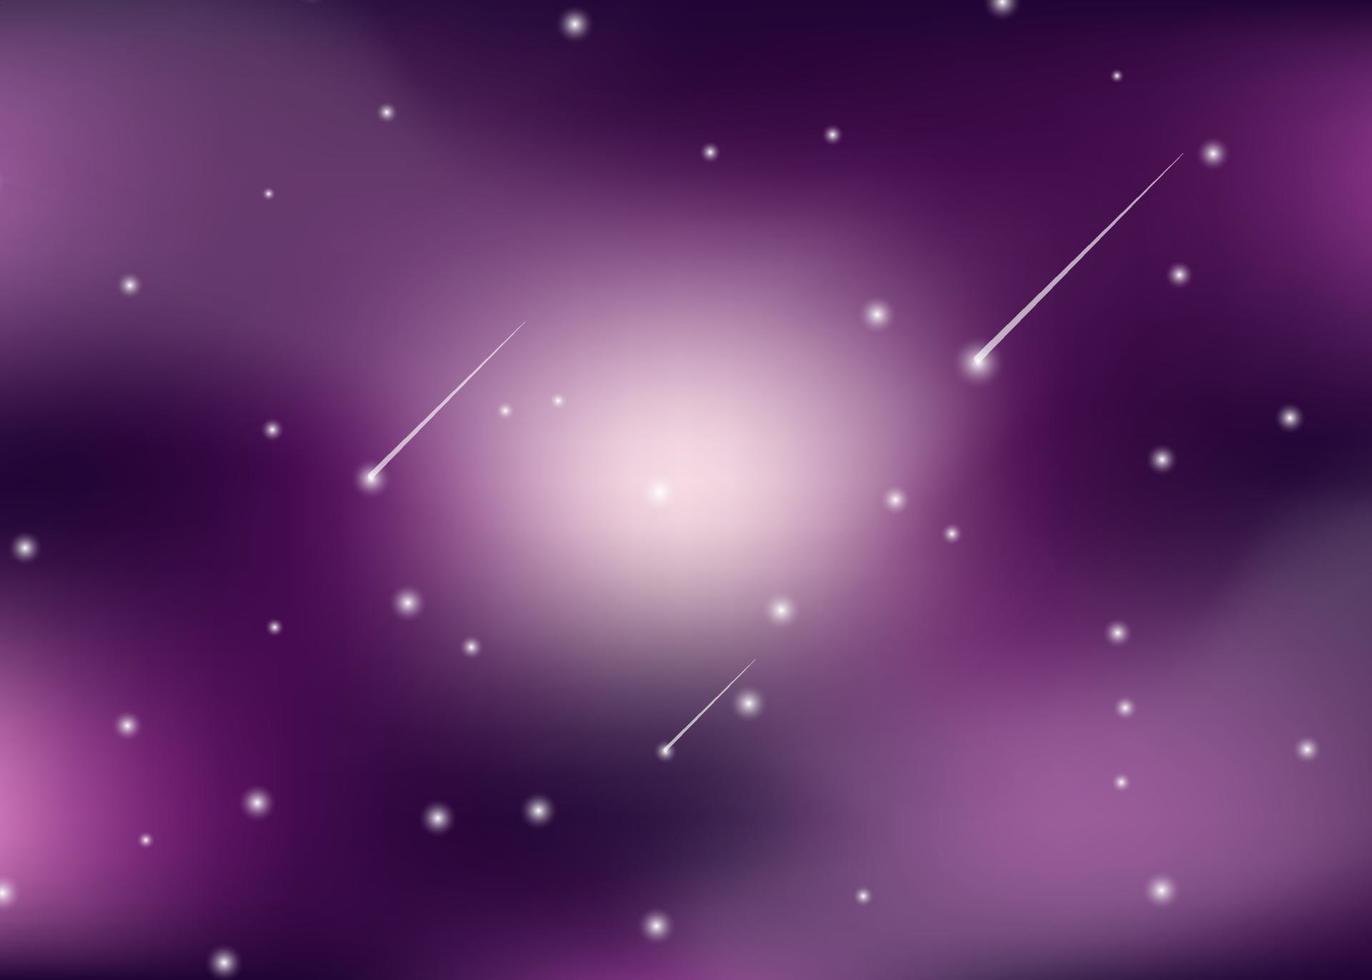 Space Background With Stars And Patches Of Light Abstract Astronomical vector